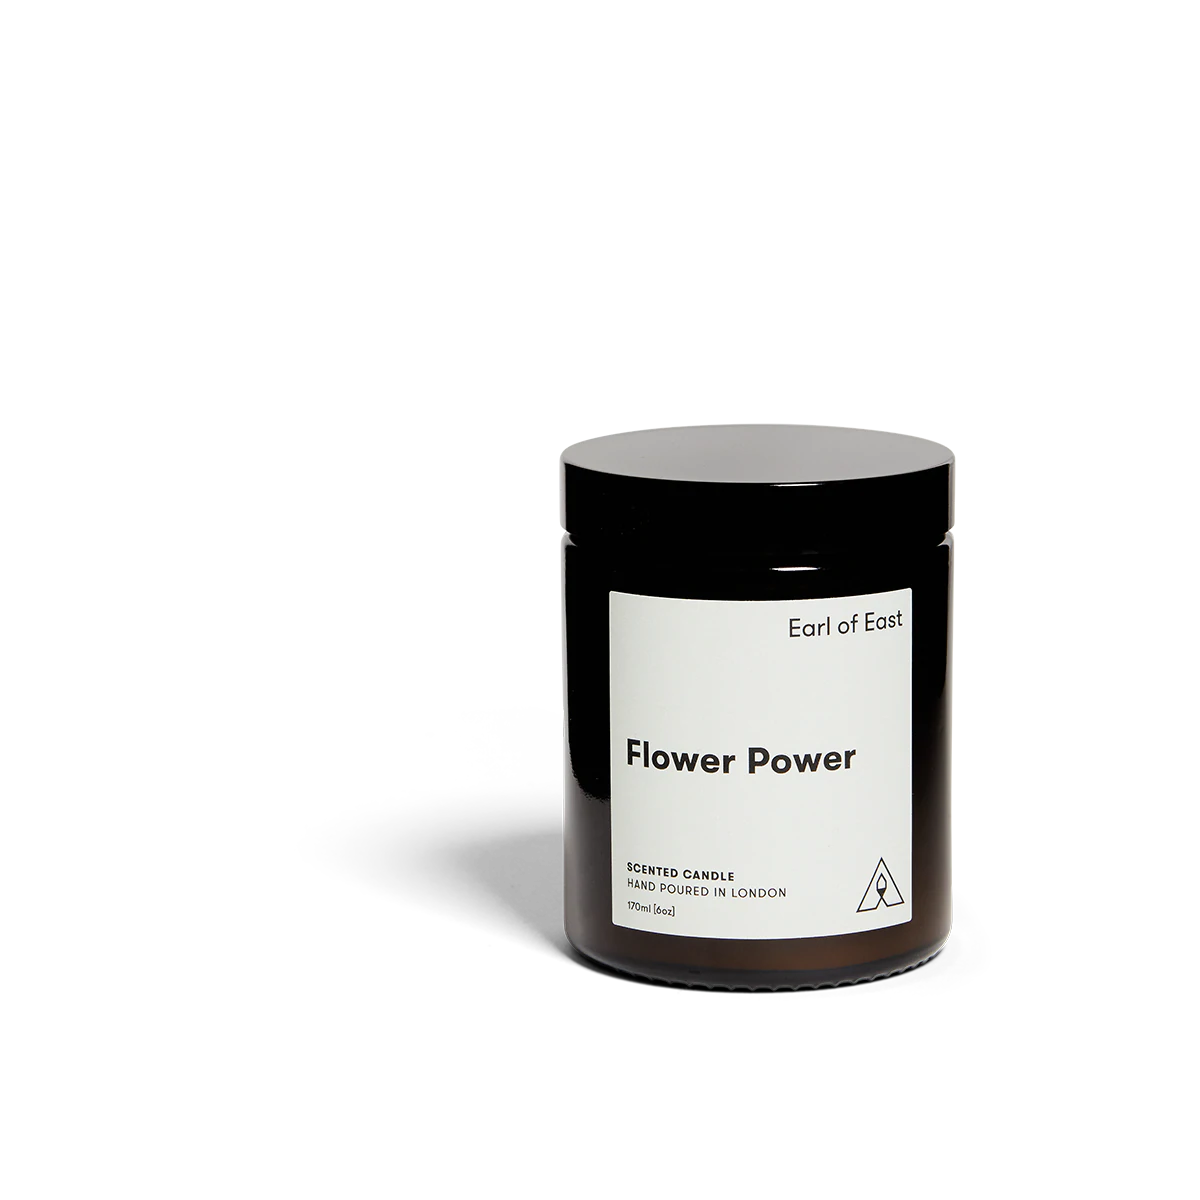 Earl of East Hand-Poured Soy Wax Candle - Flower Power